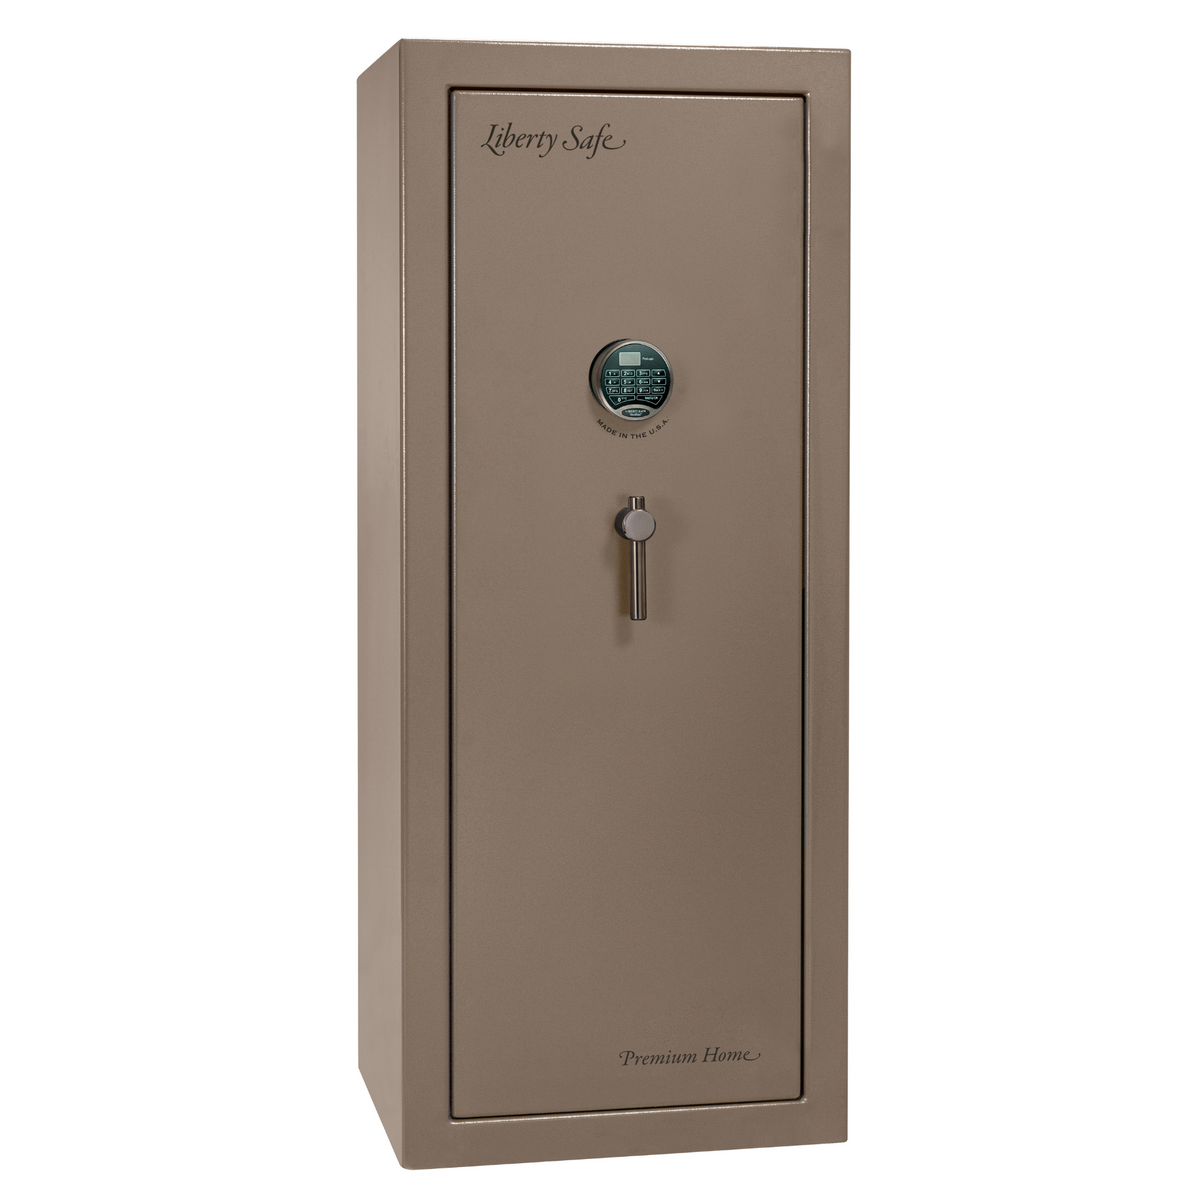 Premium Home Series | Level 7 Security | 2 Hour Fire Protection | 17 | Dimensions: 60.25&quot;(H) x 24.5&quot;(W) x 19&quot;(D) | Champagne Marble - Closed Door